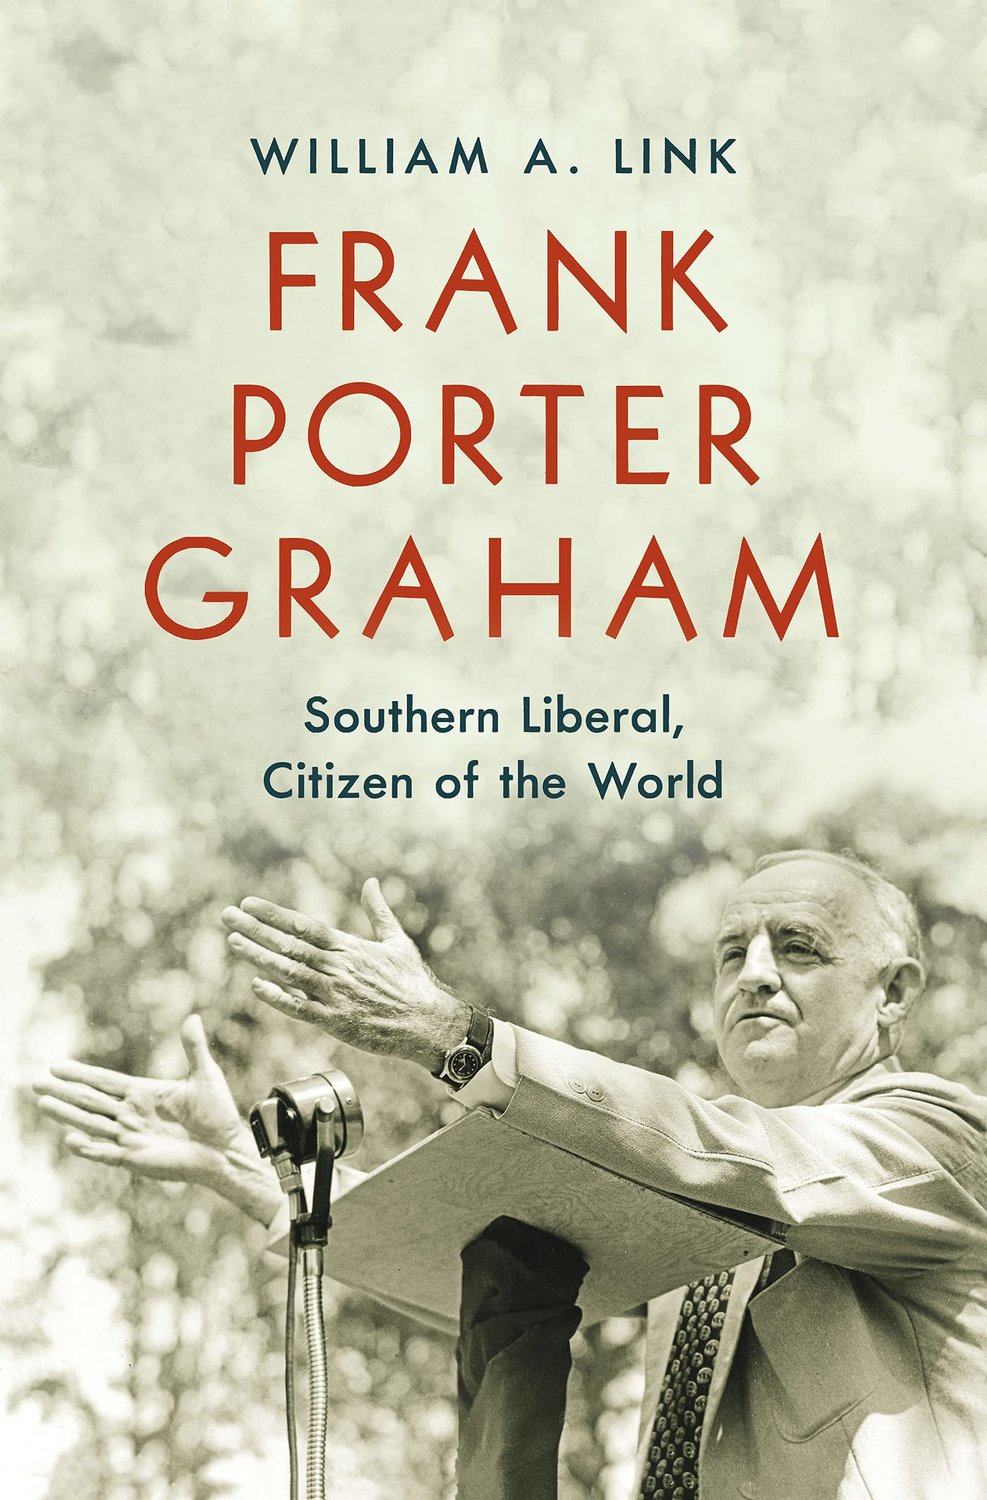 “Frank Porter Graham: Southern Liberal, Citizen Of The World” by William A. Link